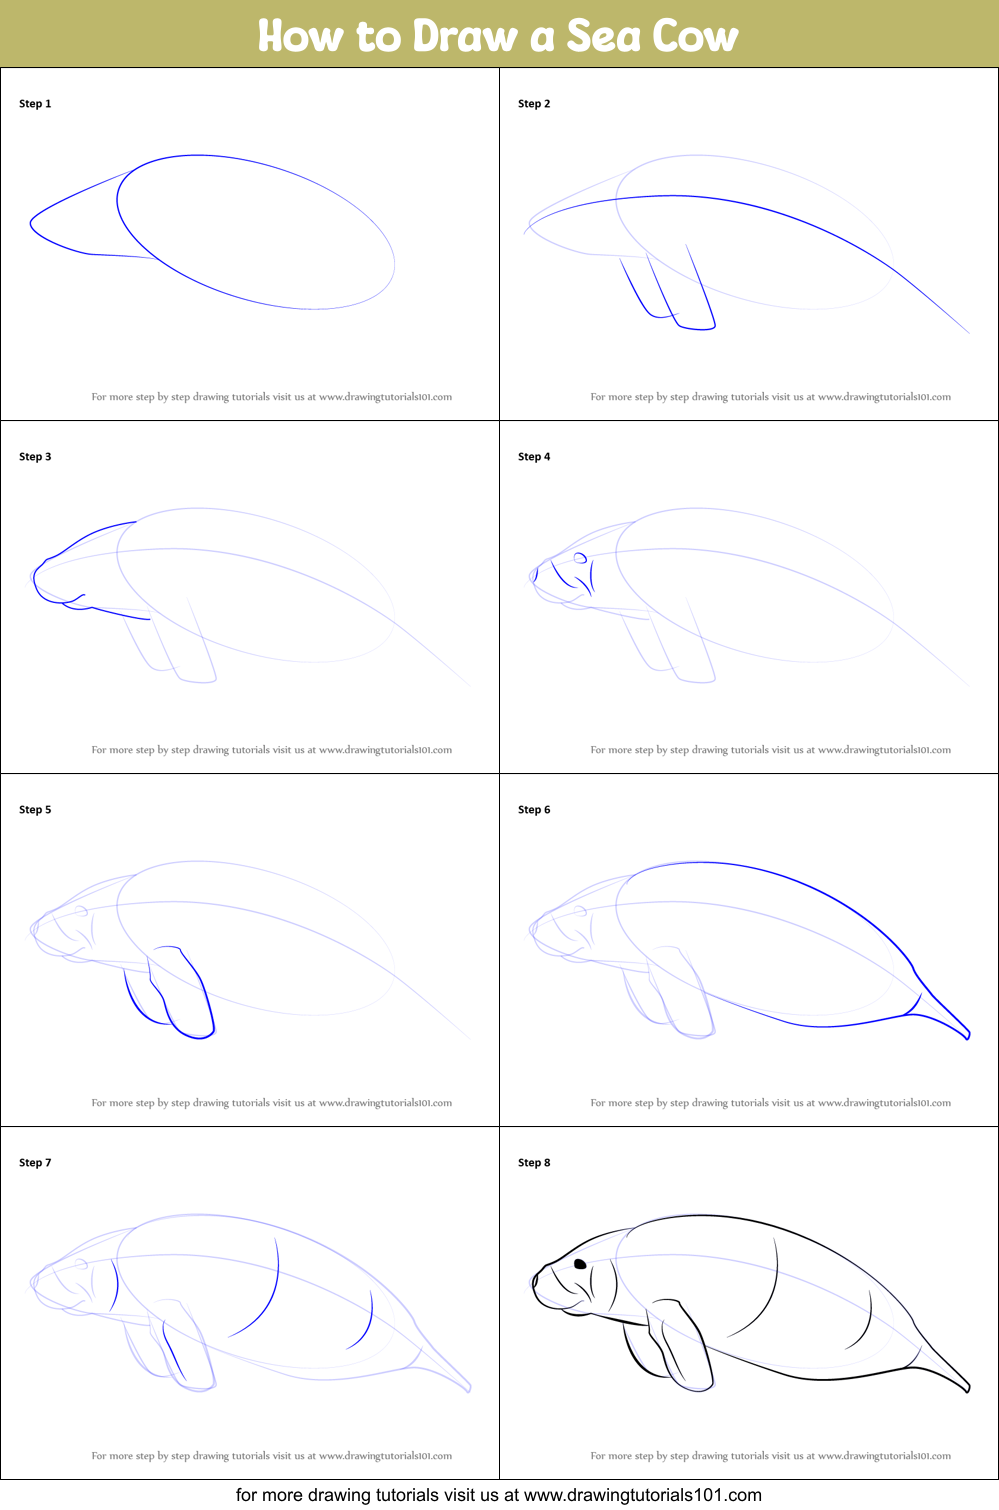 How to Draw a Sea Cow printable step by step drawing sheet